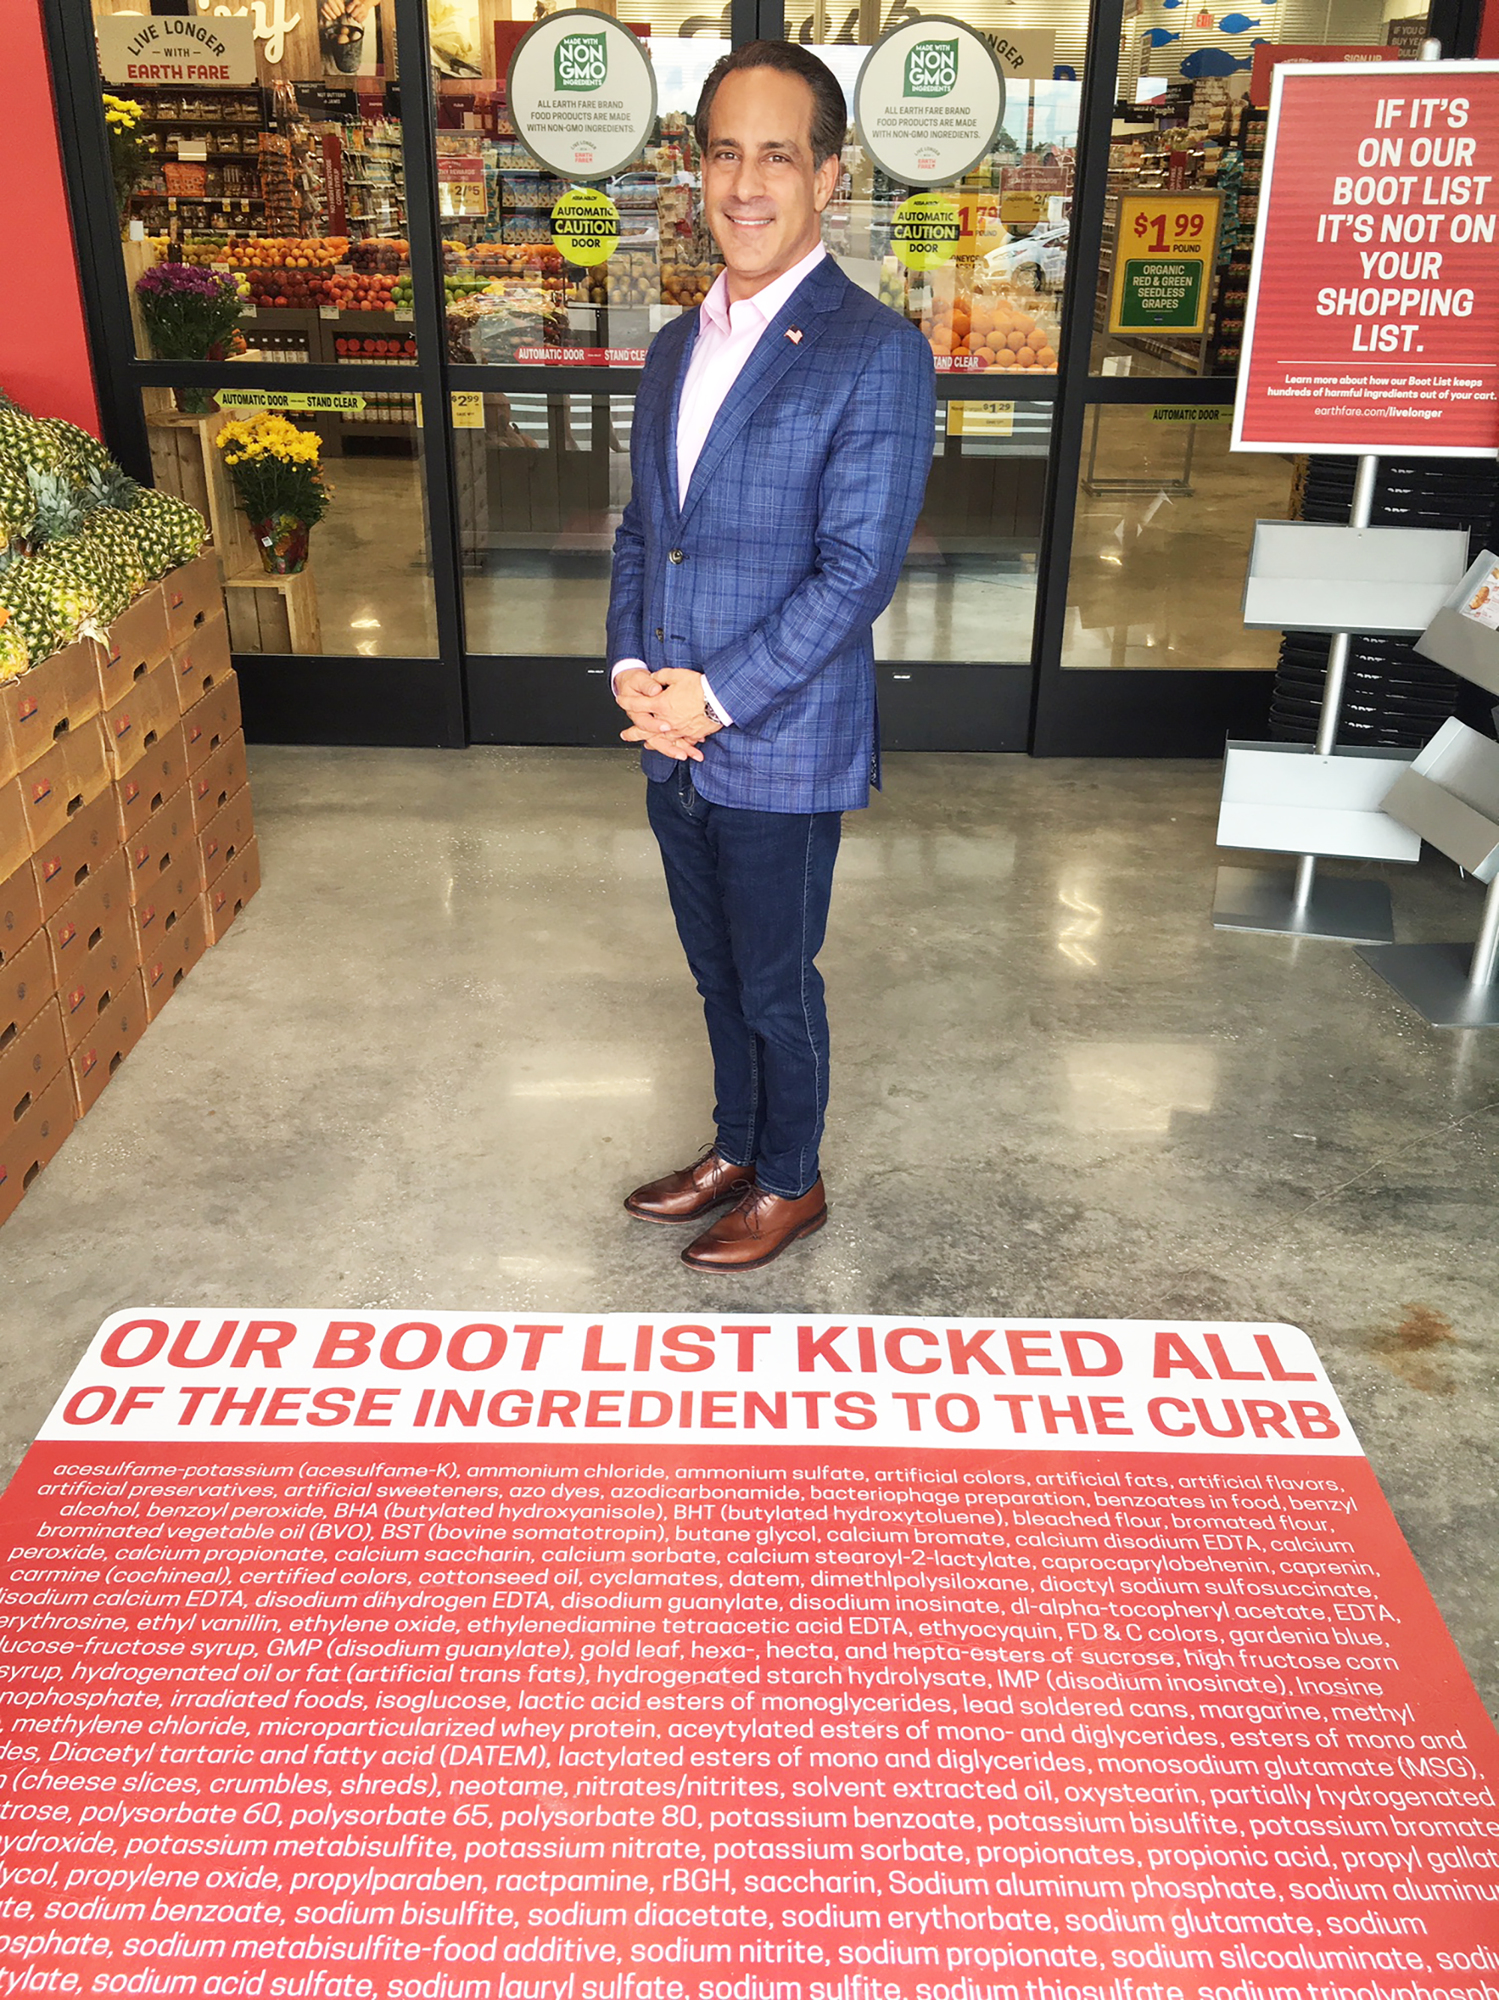 Frank Scorpiniti, Earth Fare president and CEO, stands in front of the Boot List that greets customers at the front door.